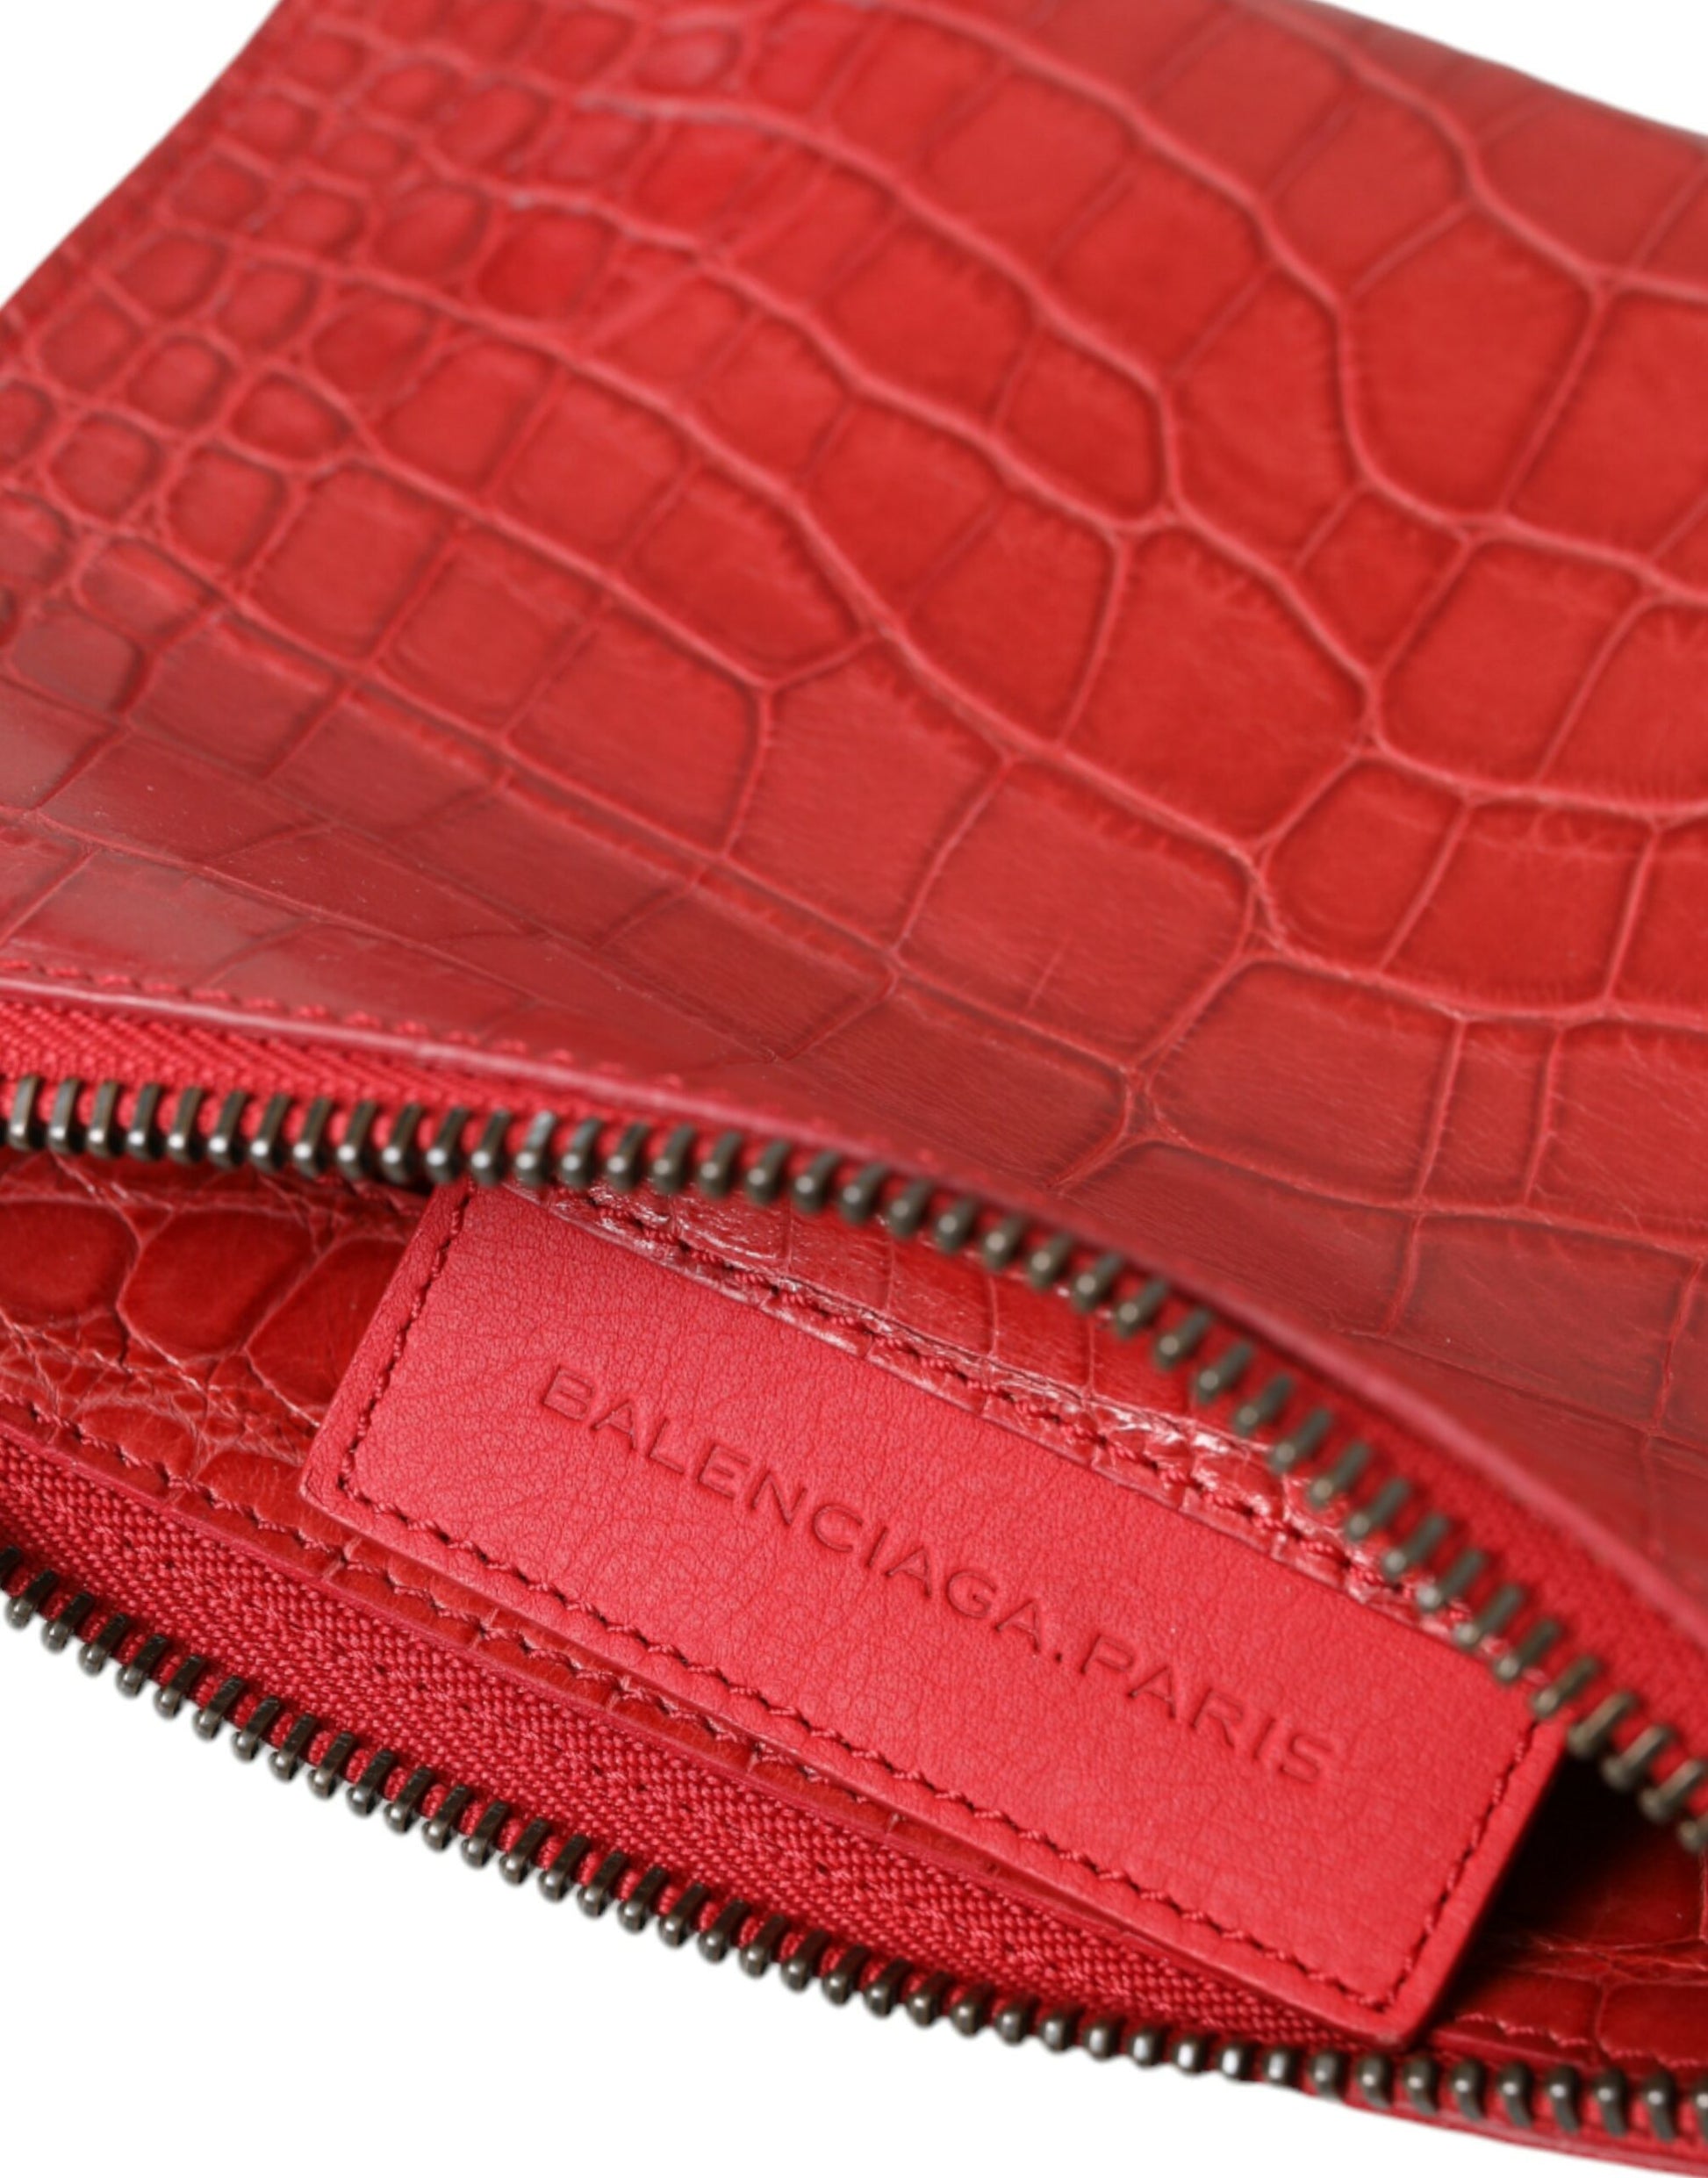 Balenciaga Exotic Red Alligator Leather Clutch - Gio Beverly Hills